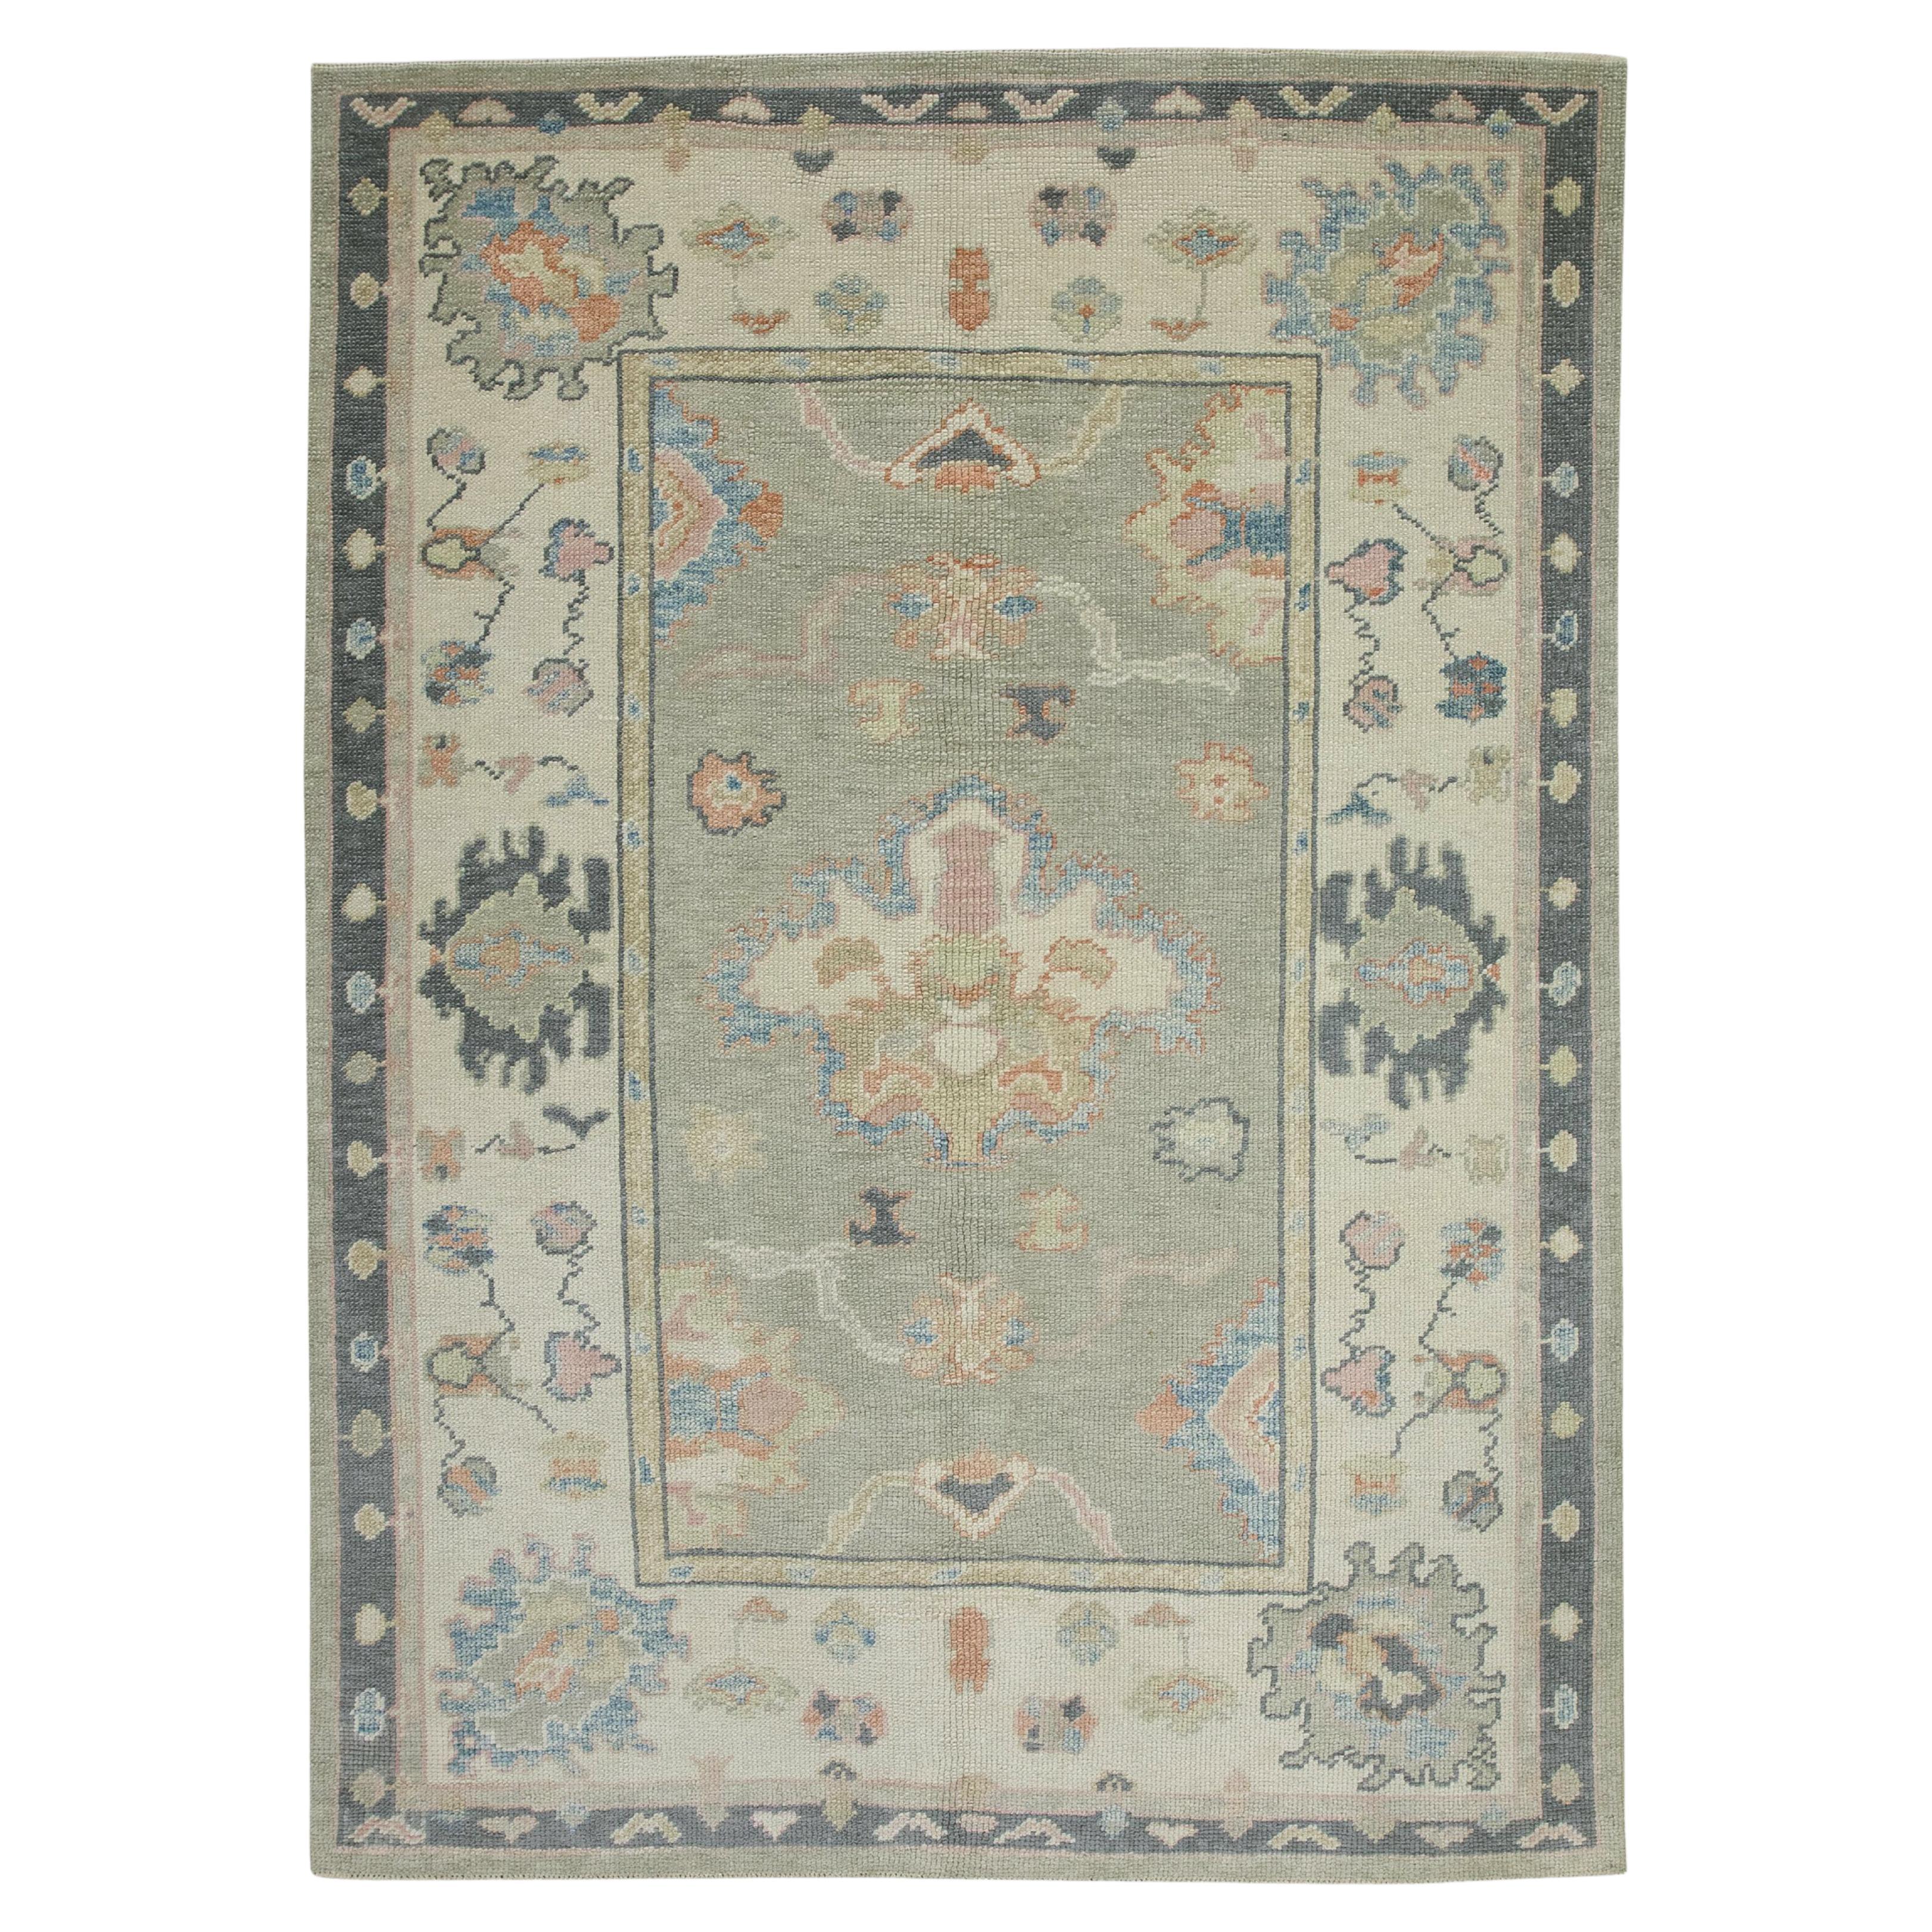 Green & Charcoal Floral Design Handwoven Wool Turkish Oushak Rug 4'8" x 6'5" For Sale